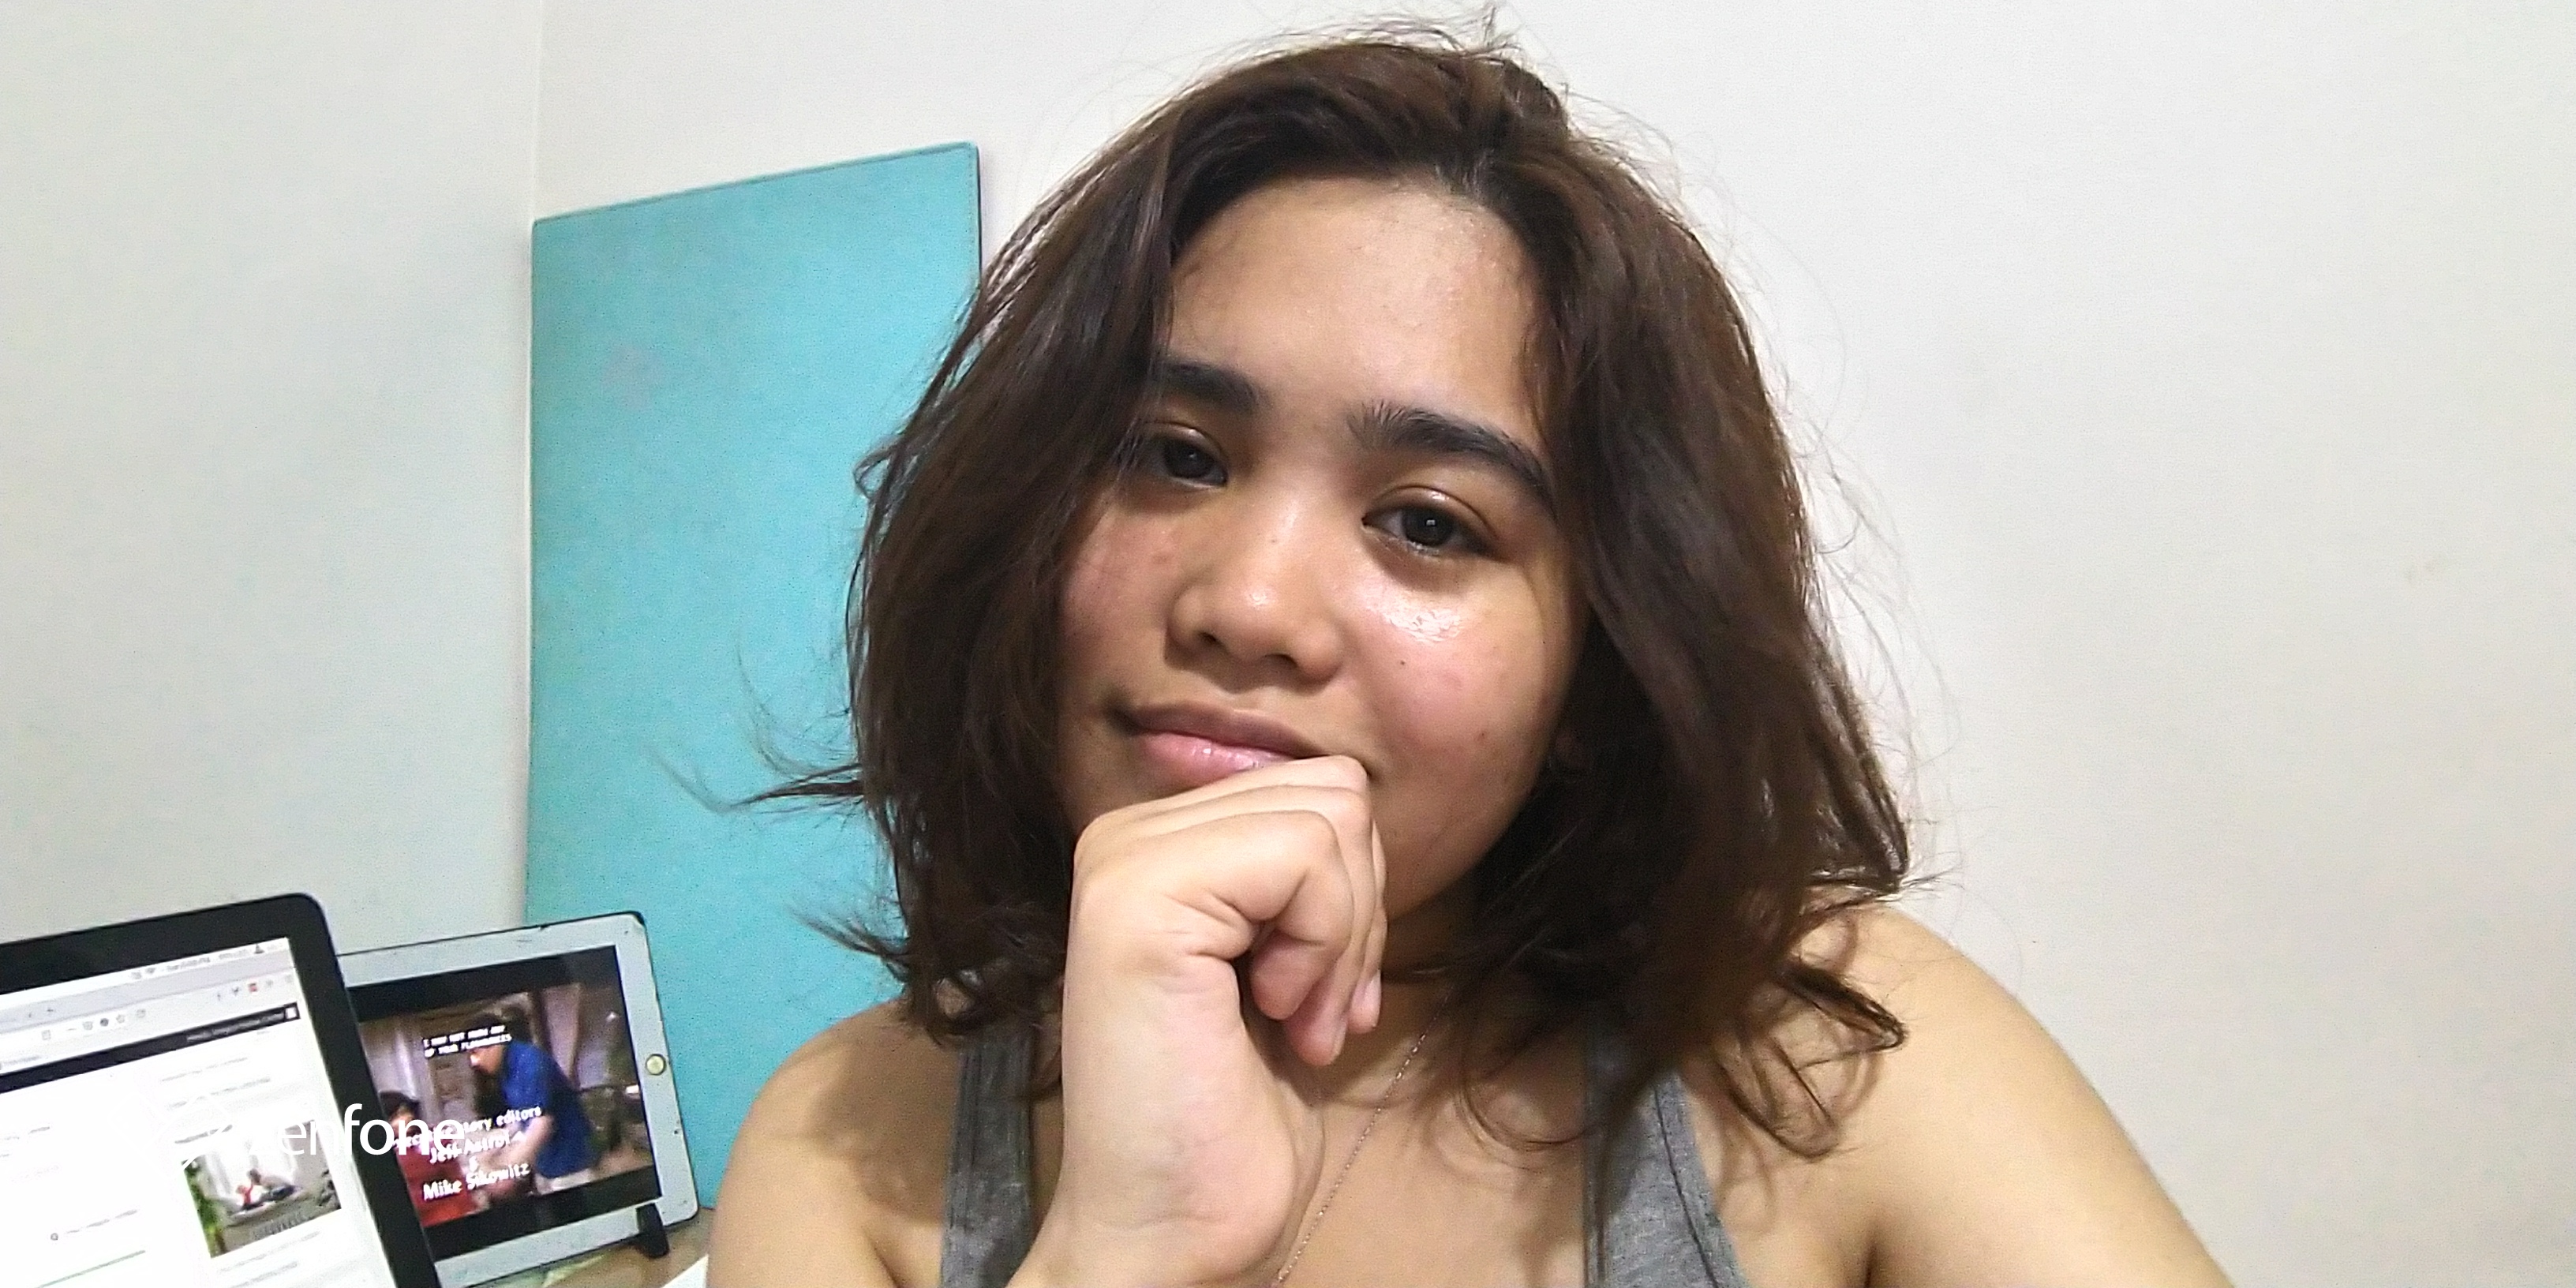 Maria's bare face for the Self-Love Project